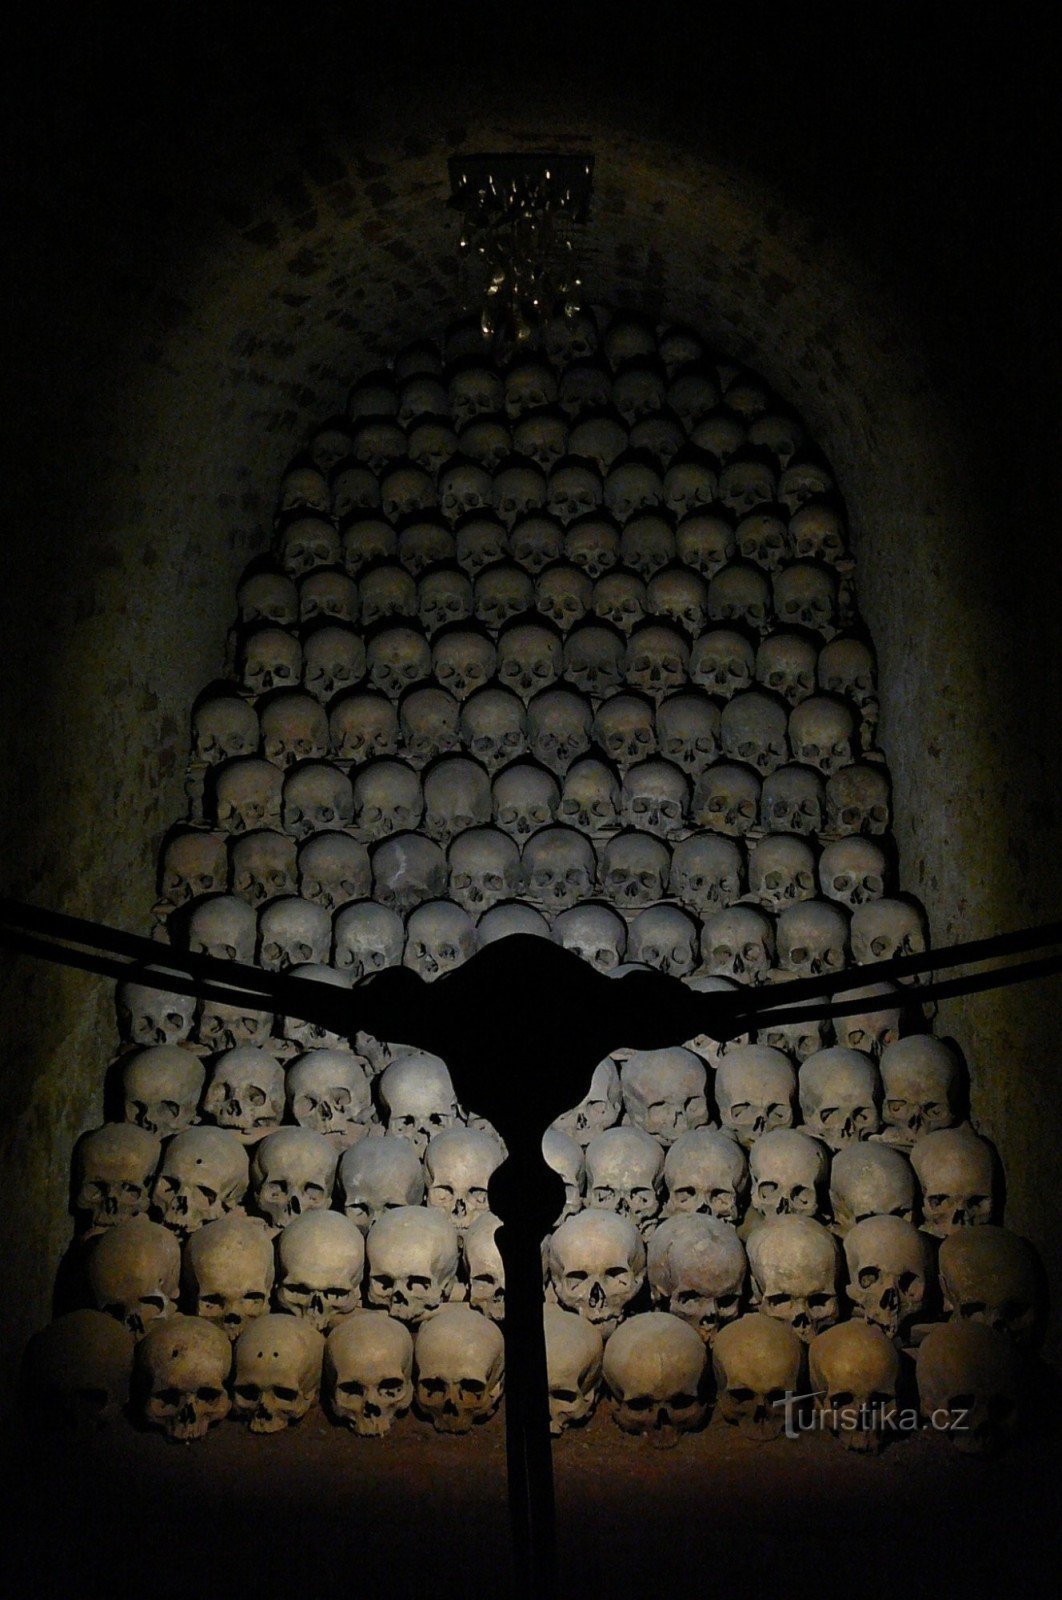 The most impressive part of the ossuary with the Tears sculpture by Jaromír Gargulák (near the ceiling)